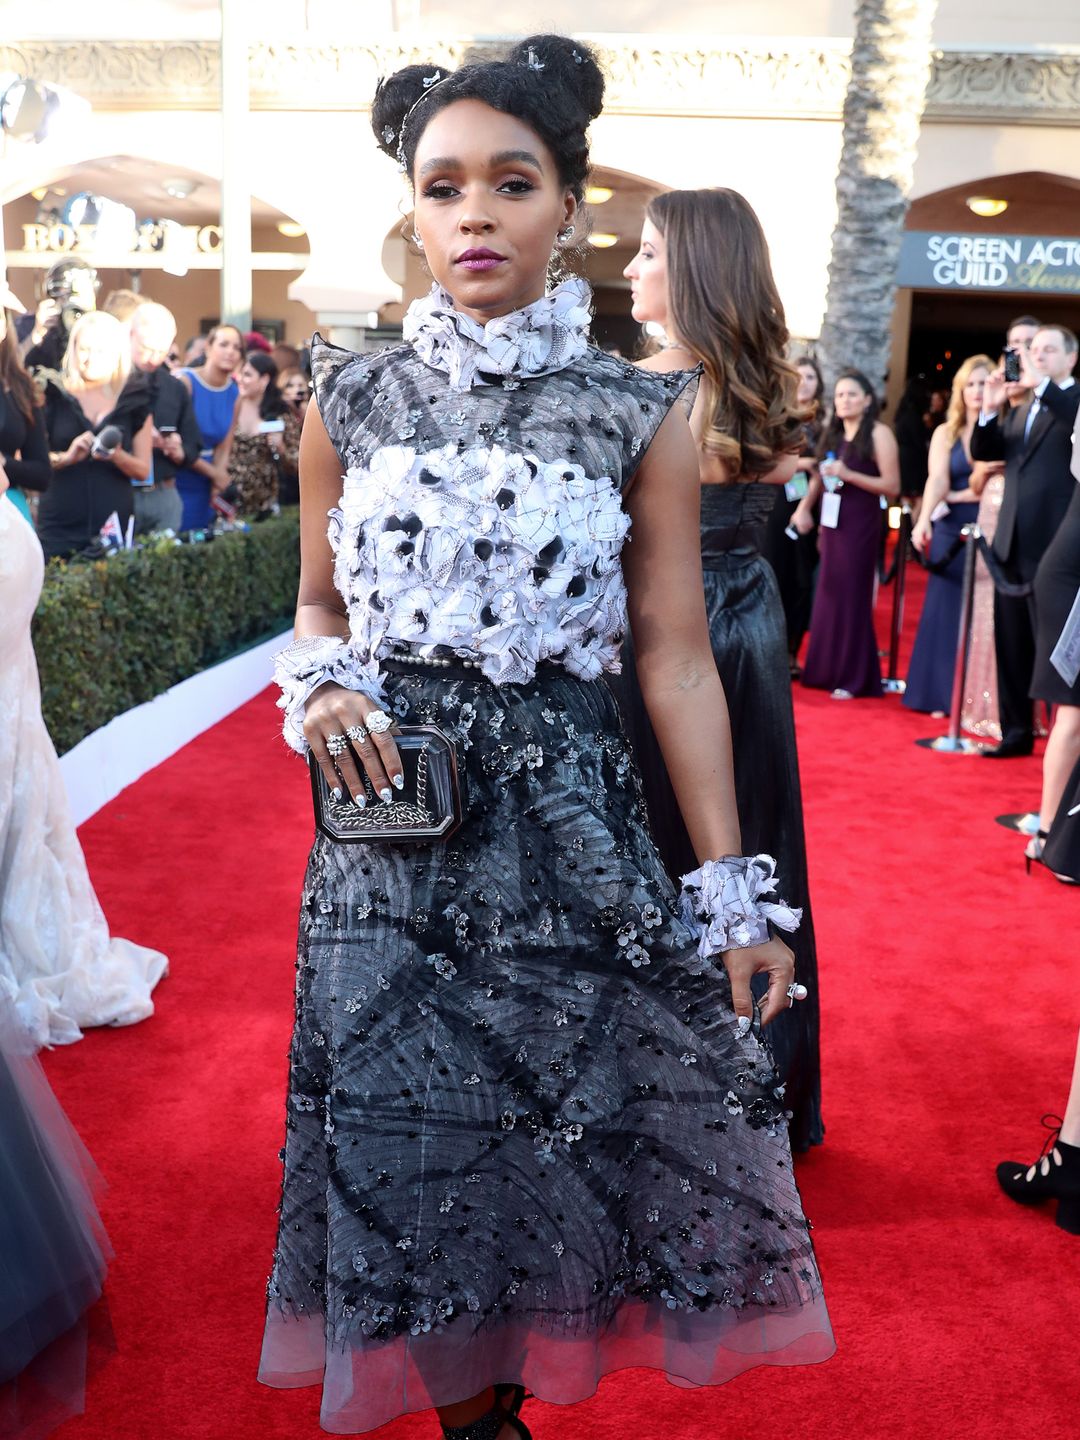 Janelle Monae attends the 23rd Annual Screen Actors Guild Awards in a black and white gown